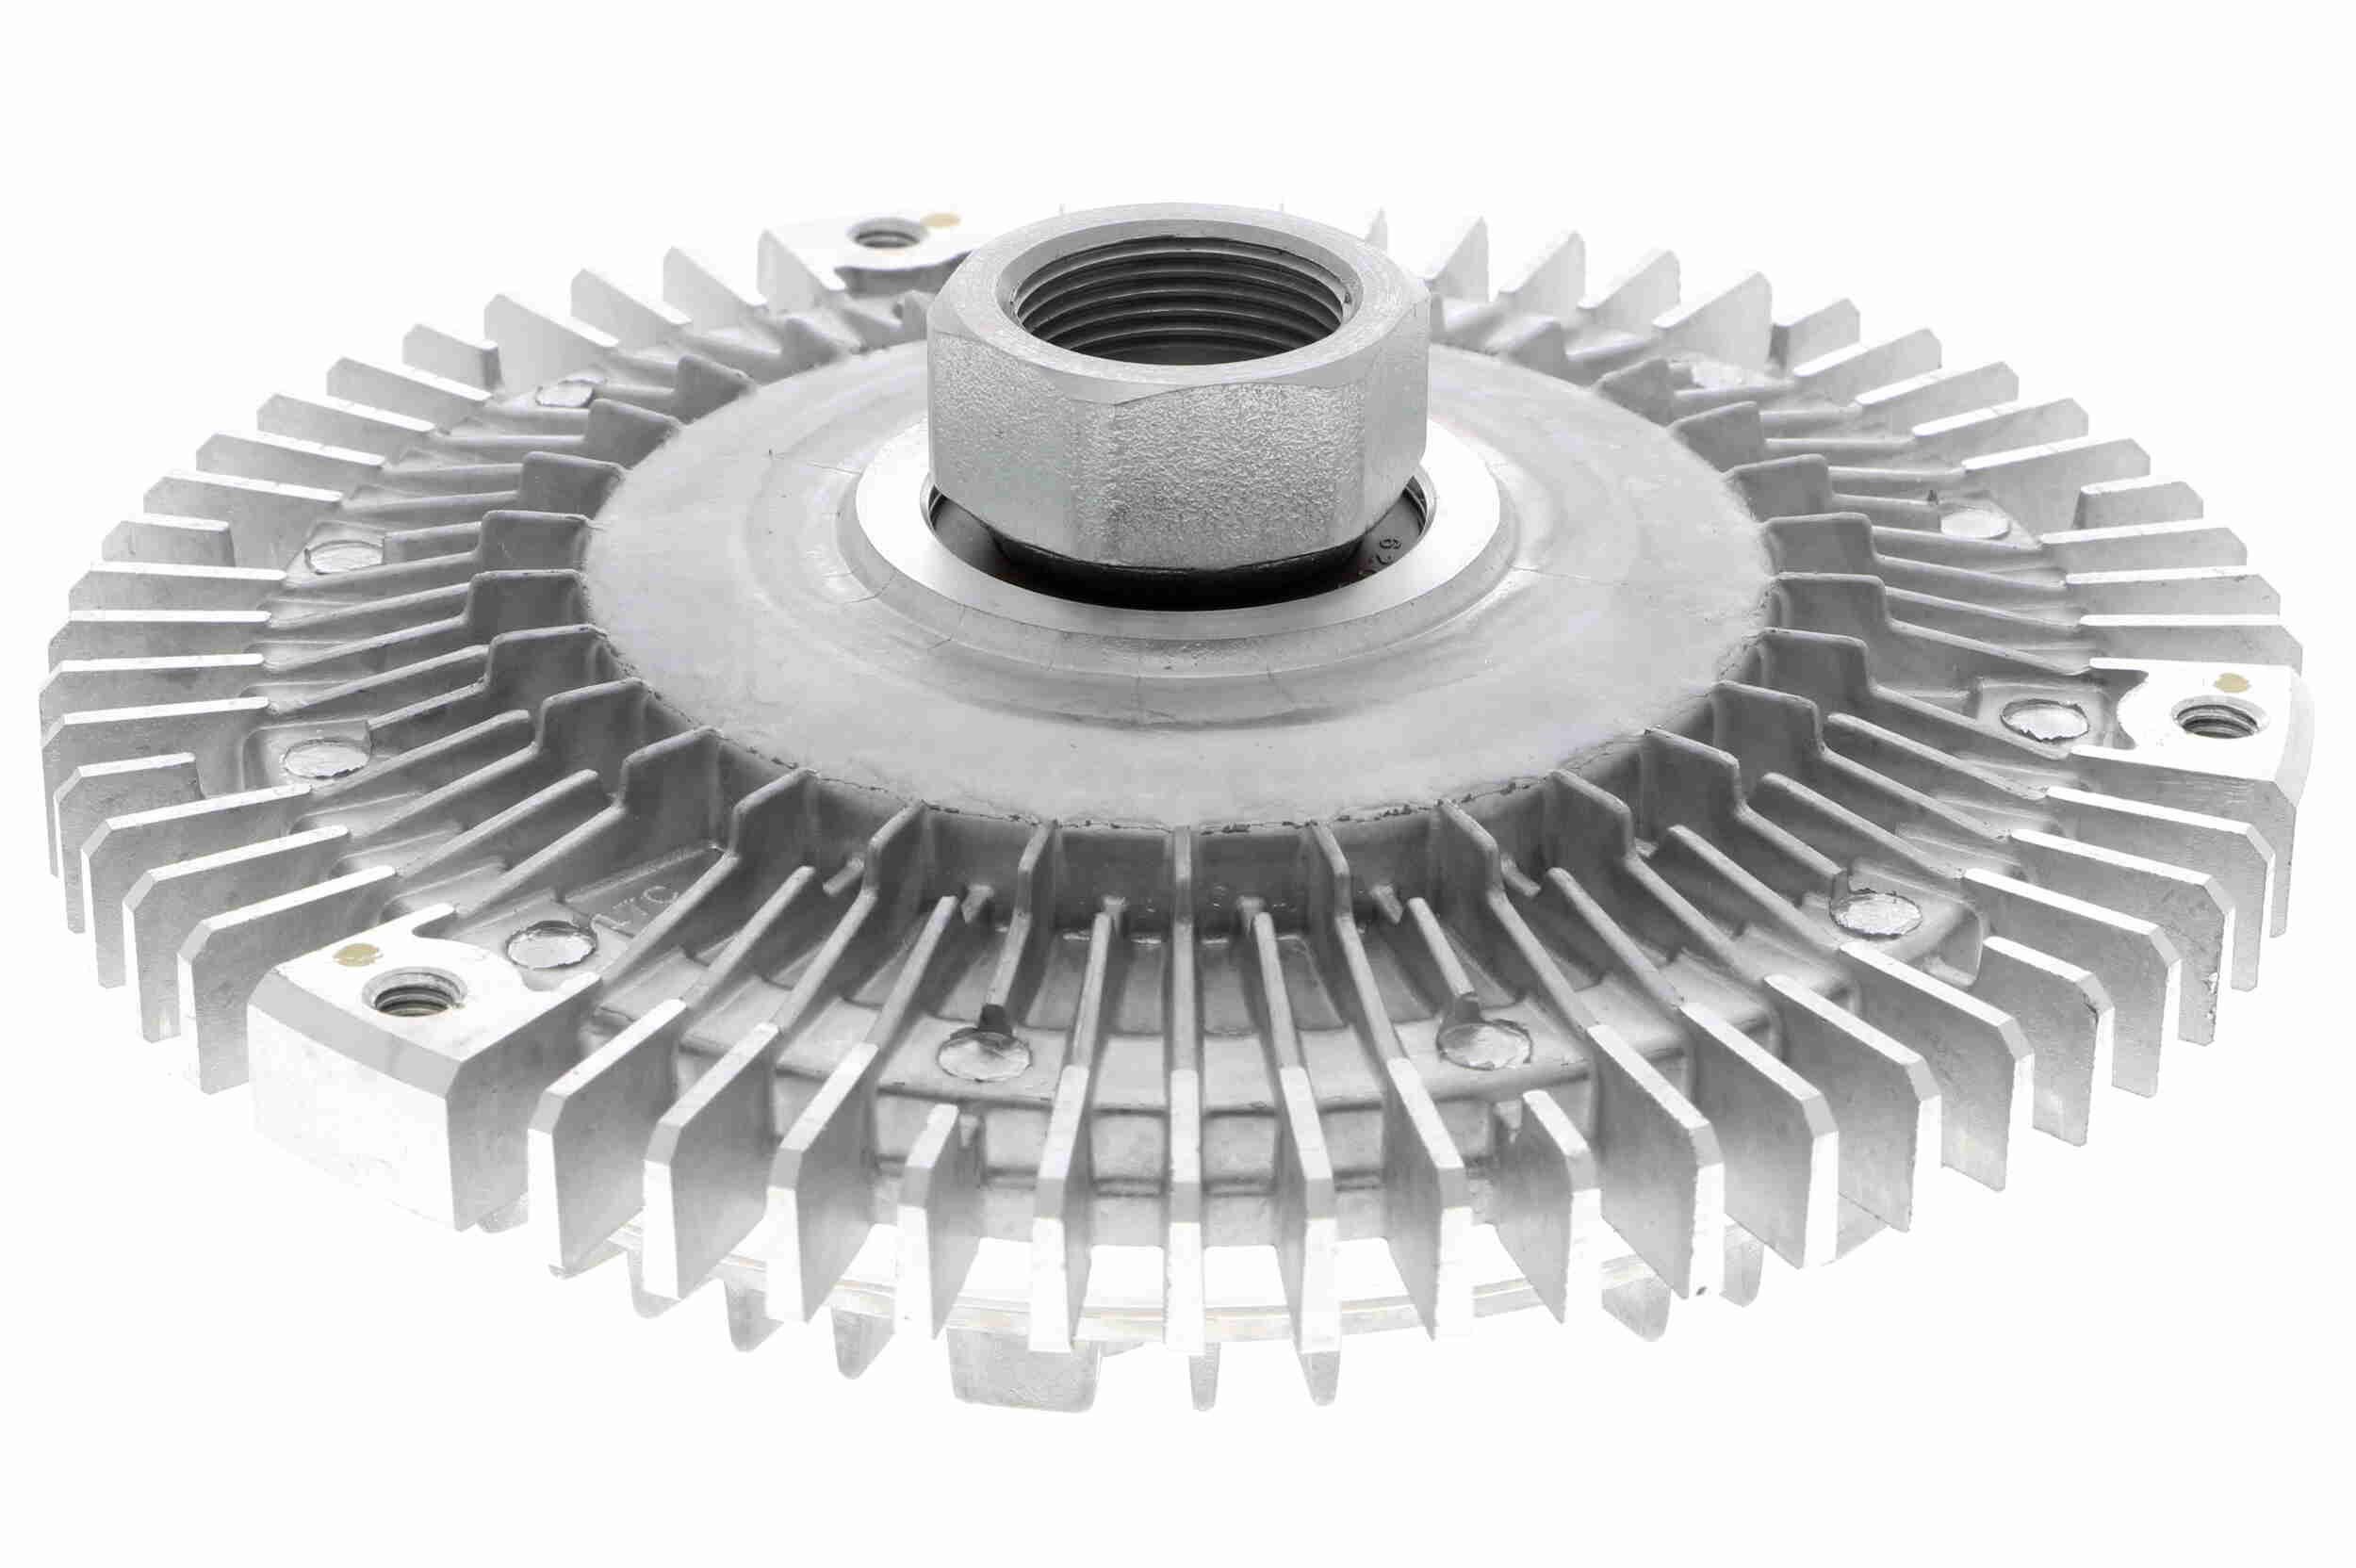 Smart Fan clutch VEMO V20-04-1070-1 at a good price